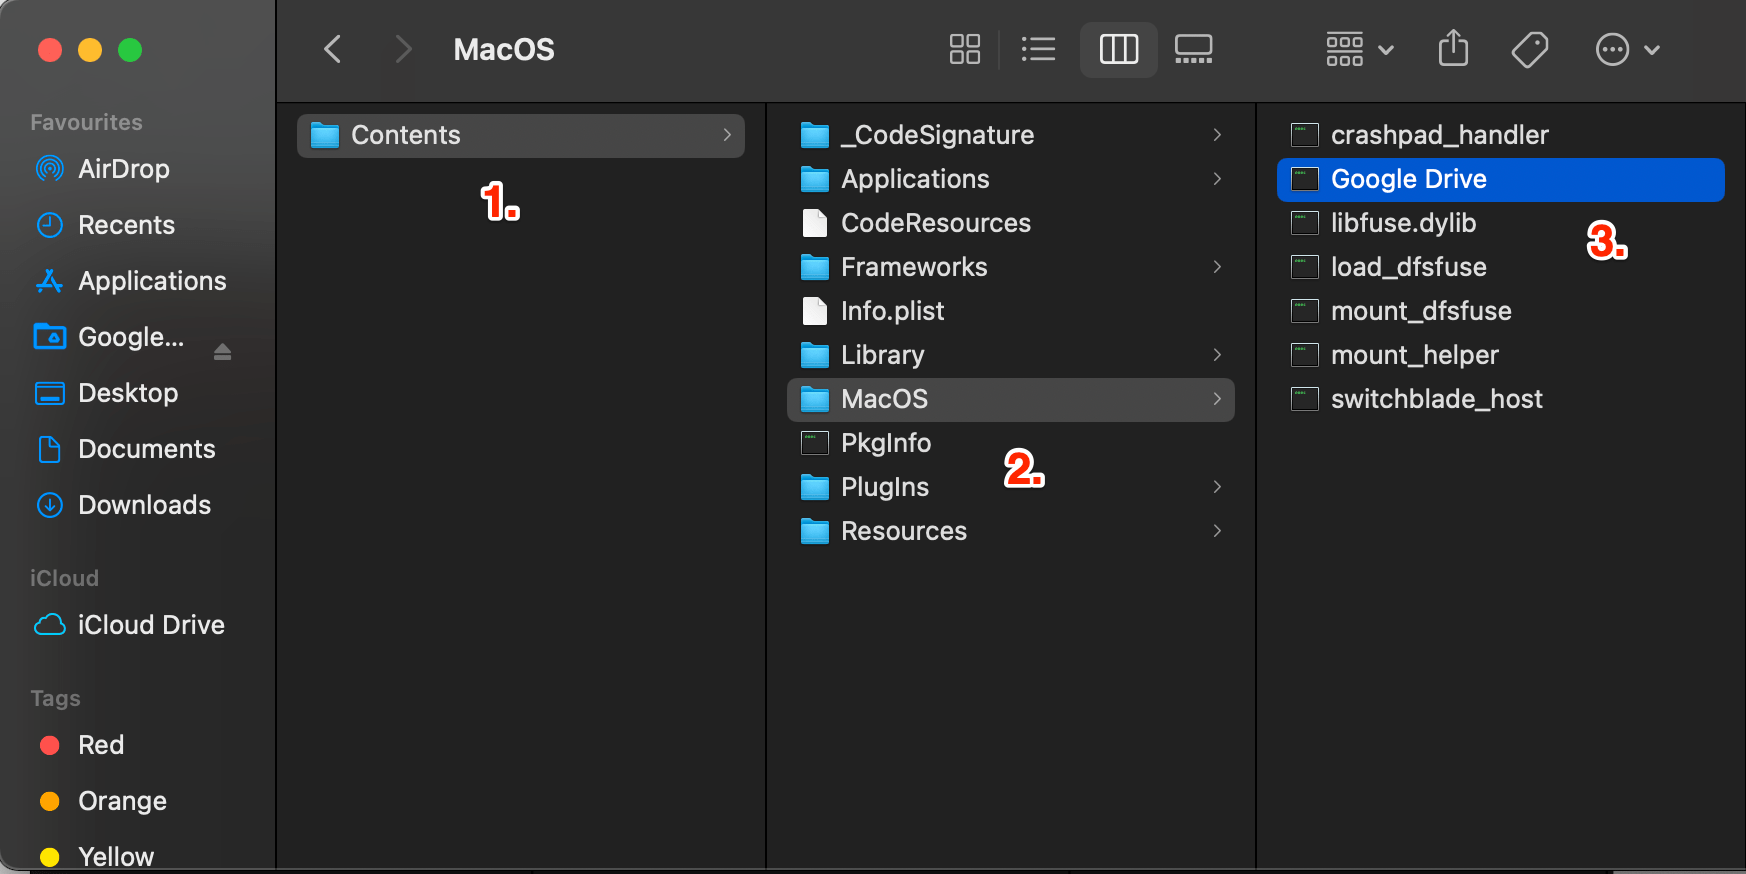 Look for the MacOS folder and open the Google Drive script